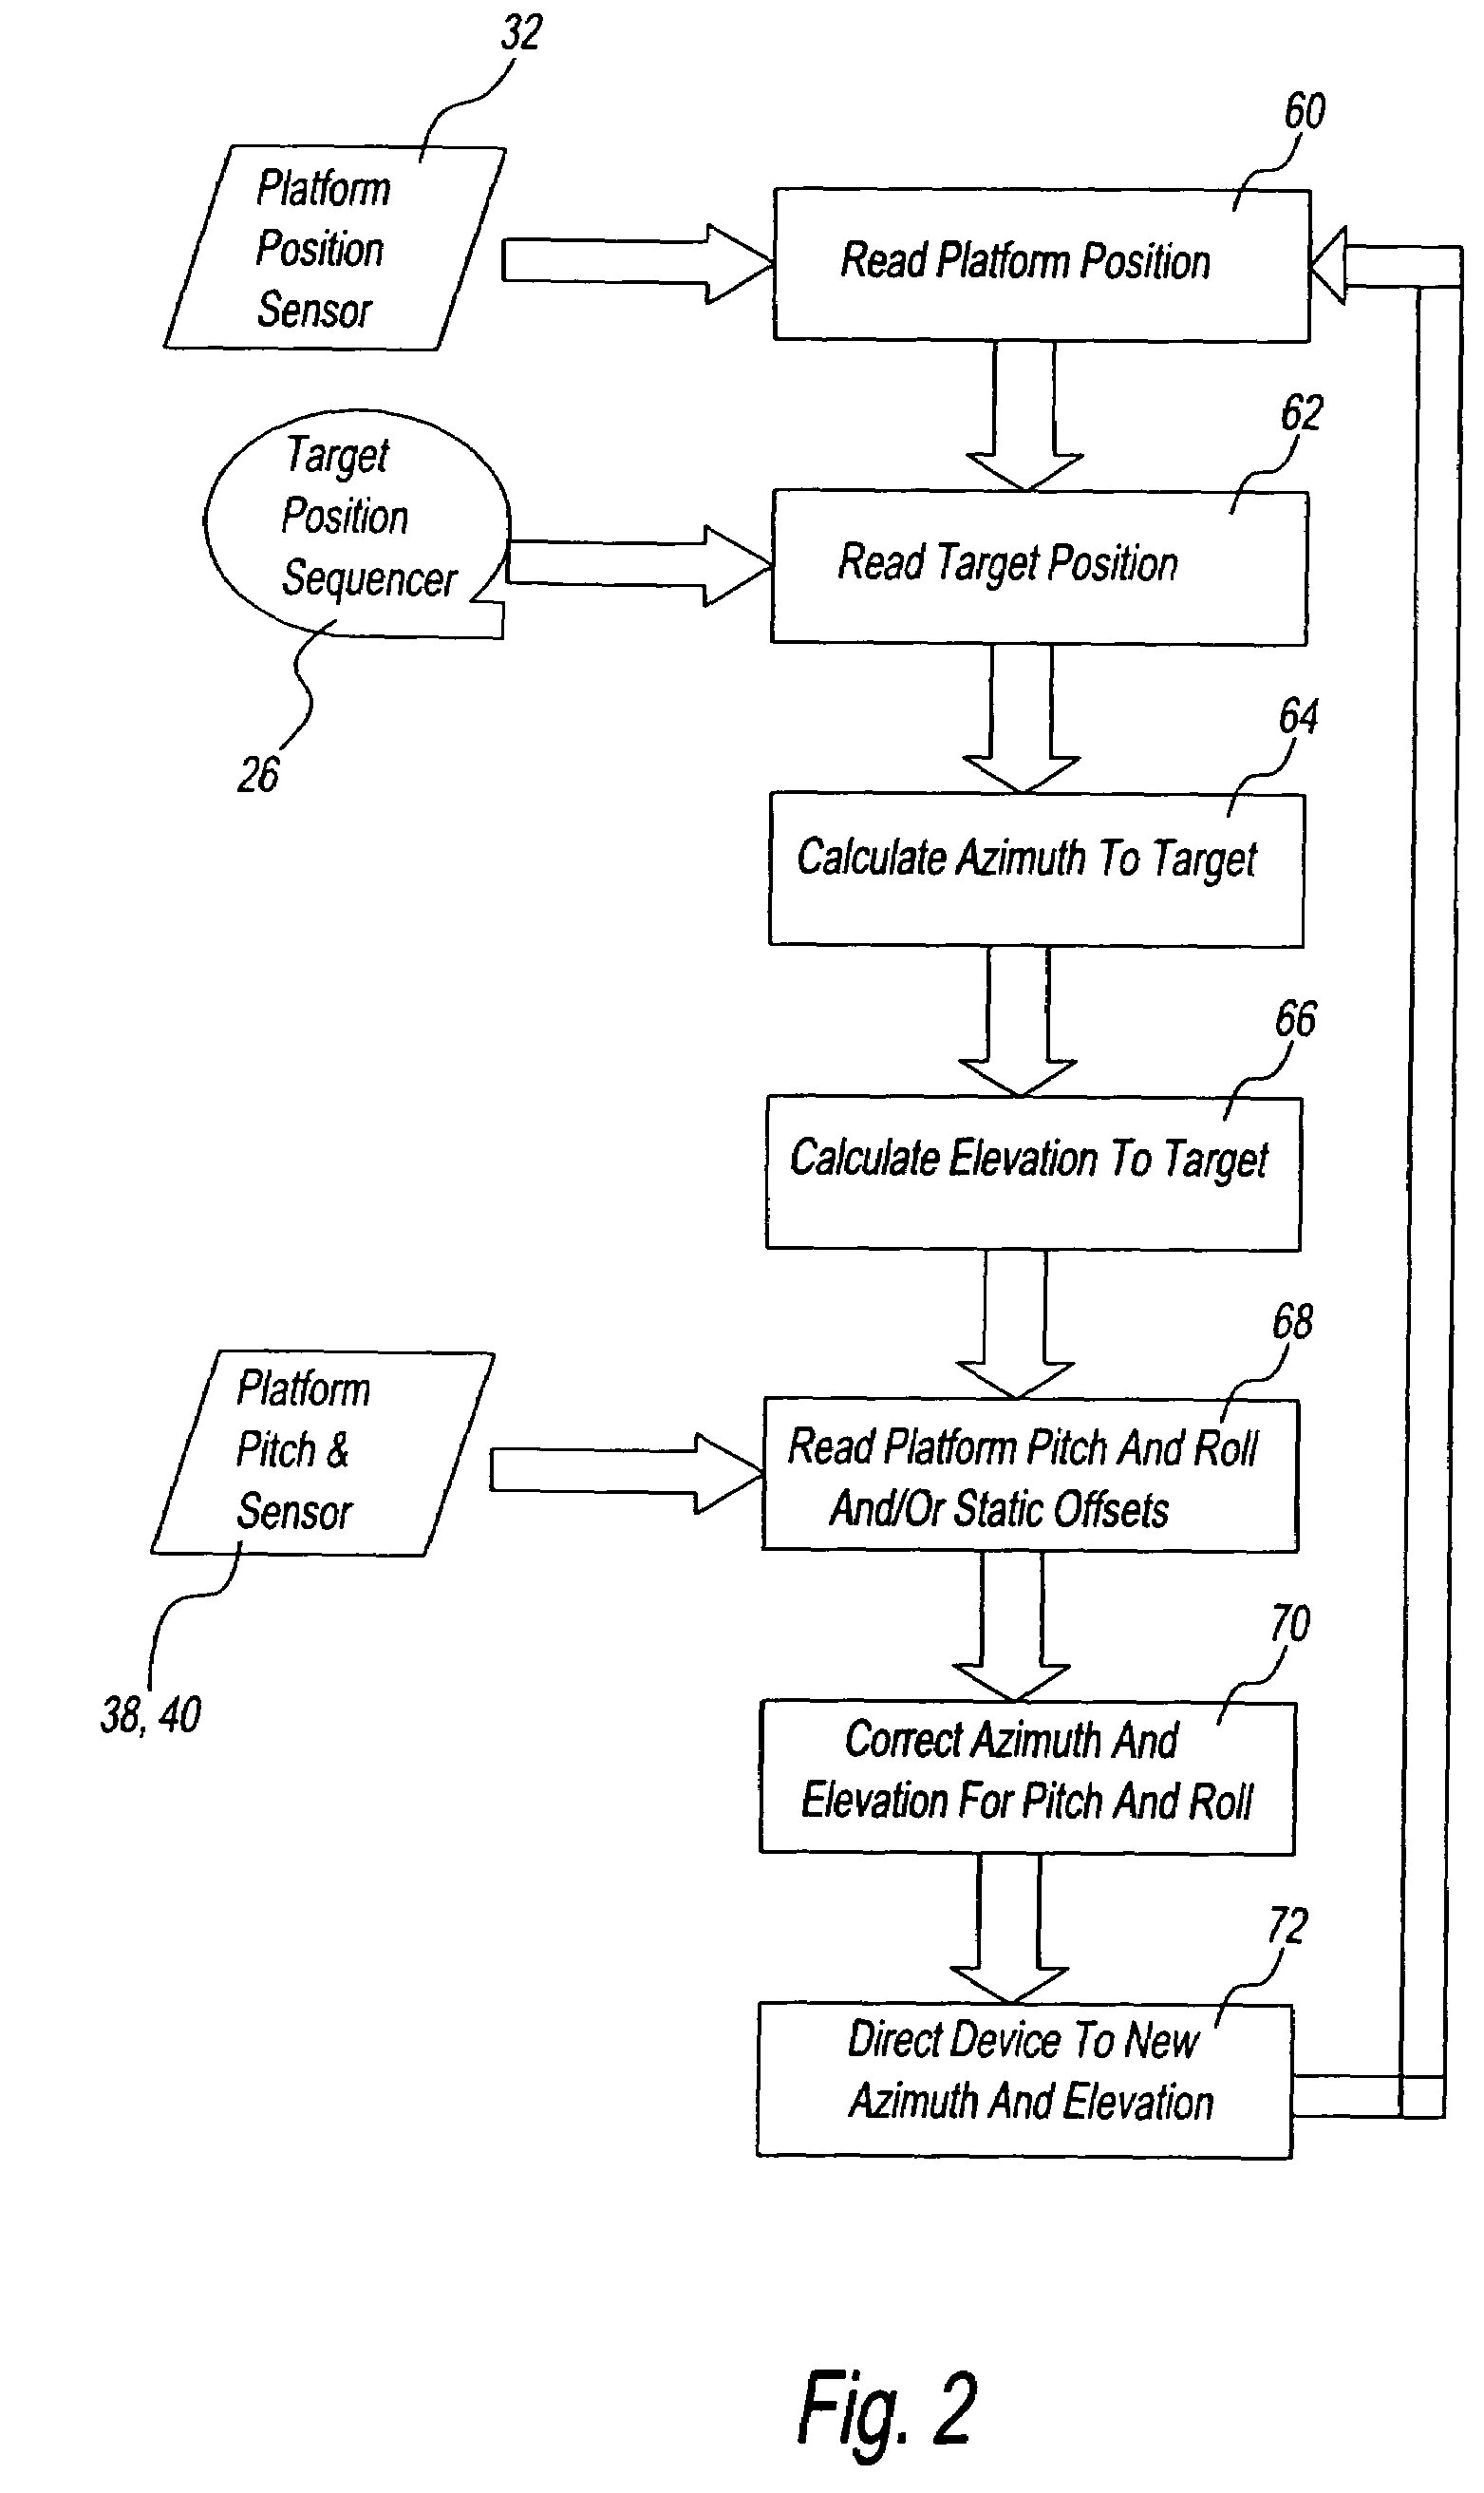 Apparatus for automatically pointing a device at a target